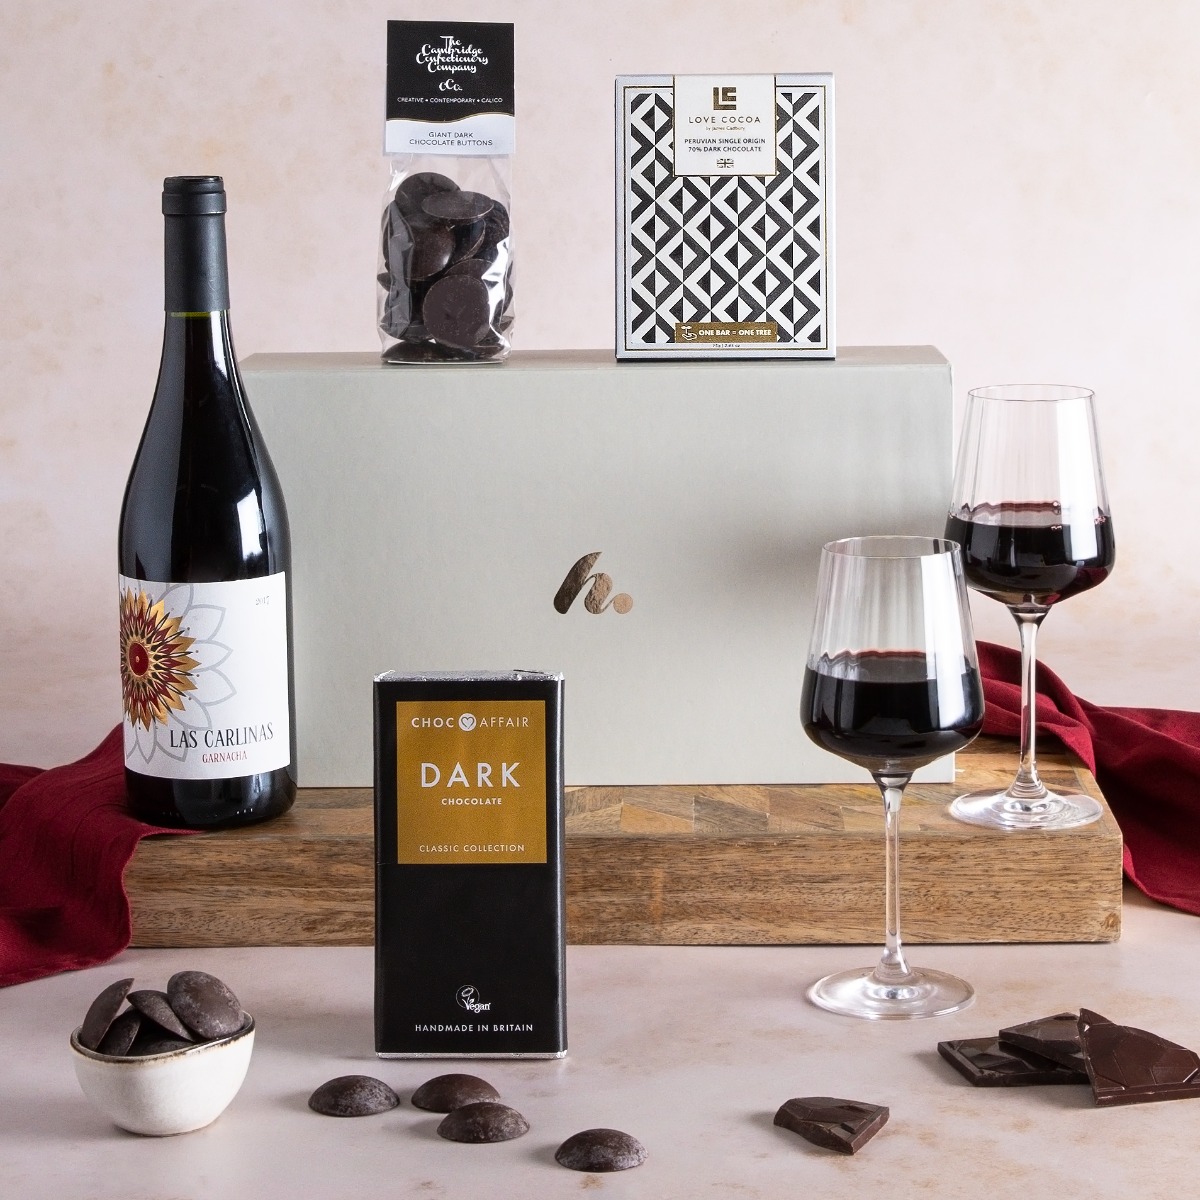 Valentine's Red Wine and Dark Chocolate gift with contents on display